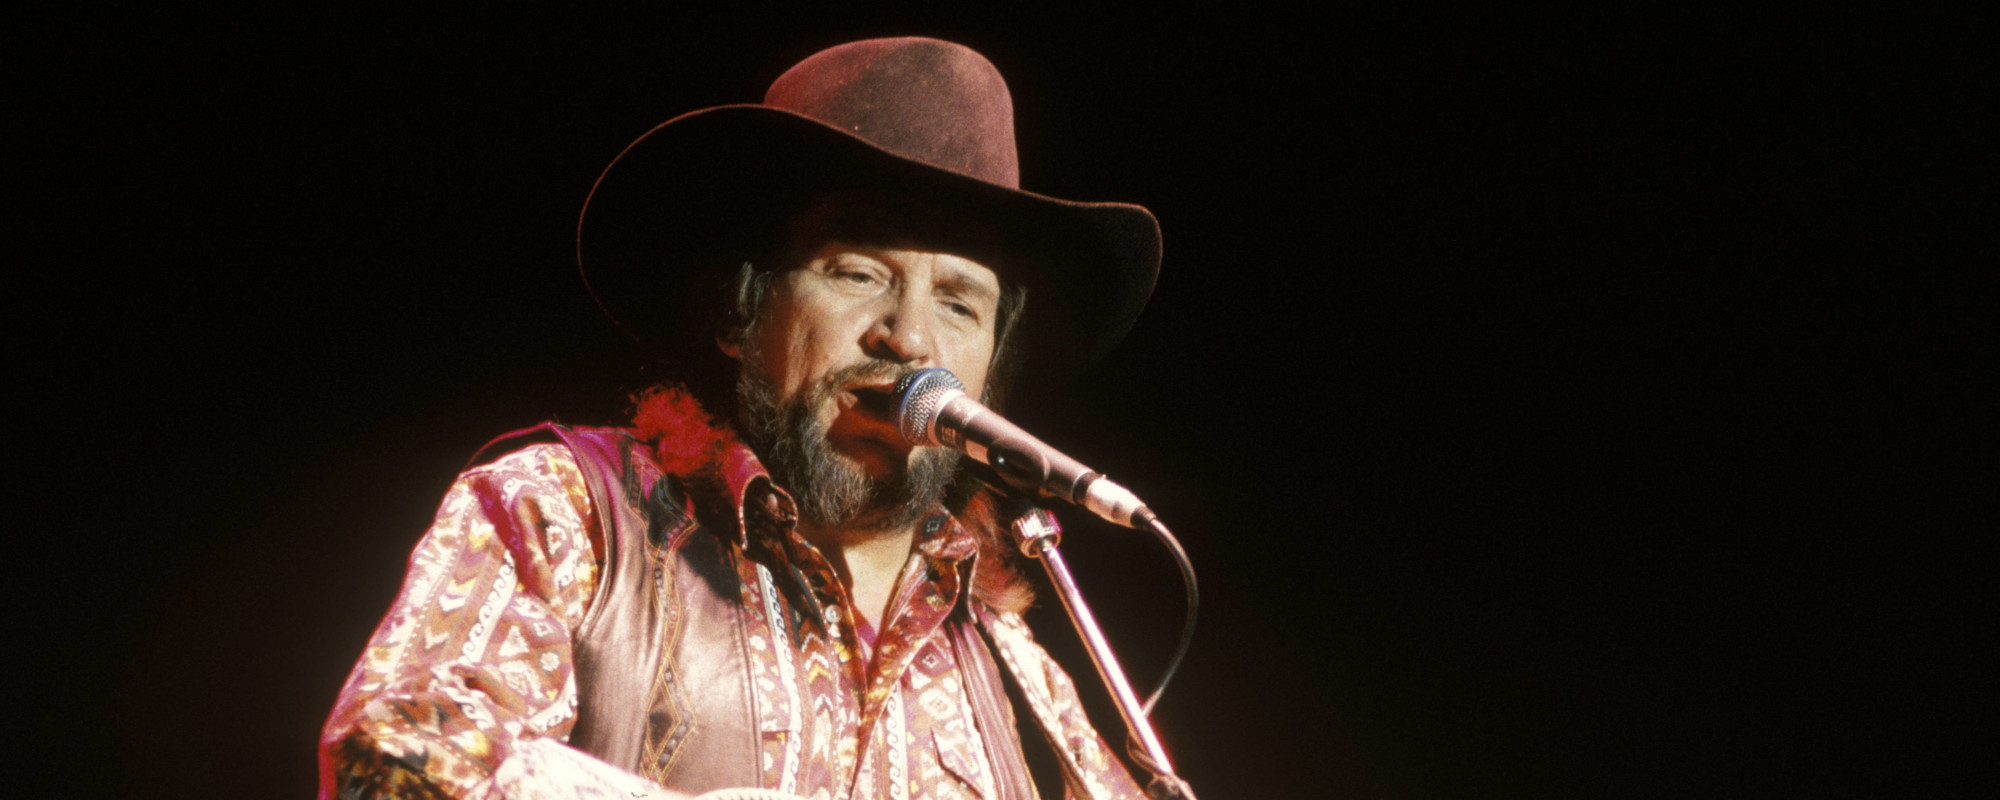 5 Fascinating Facts About Outlaw Music Legend Waylon Jennings